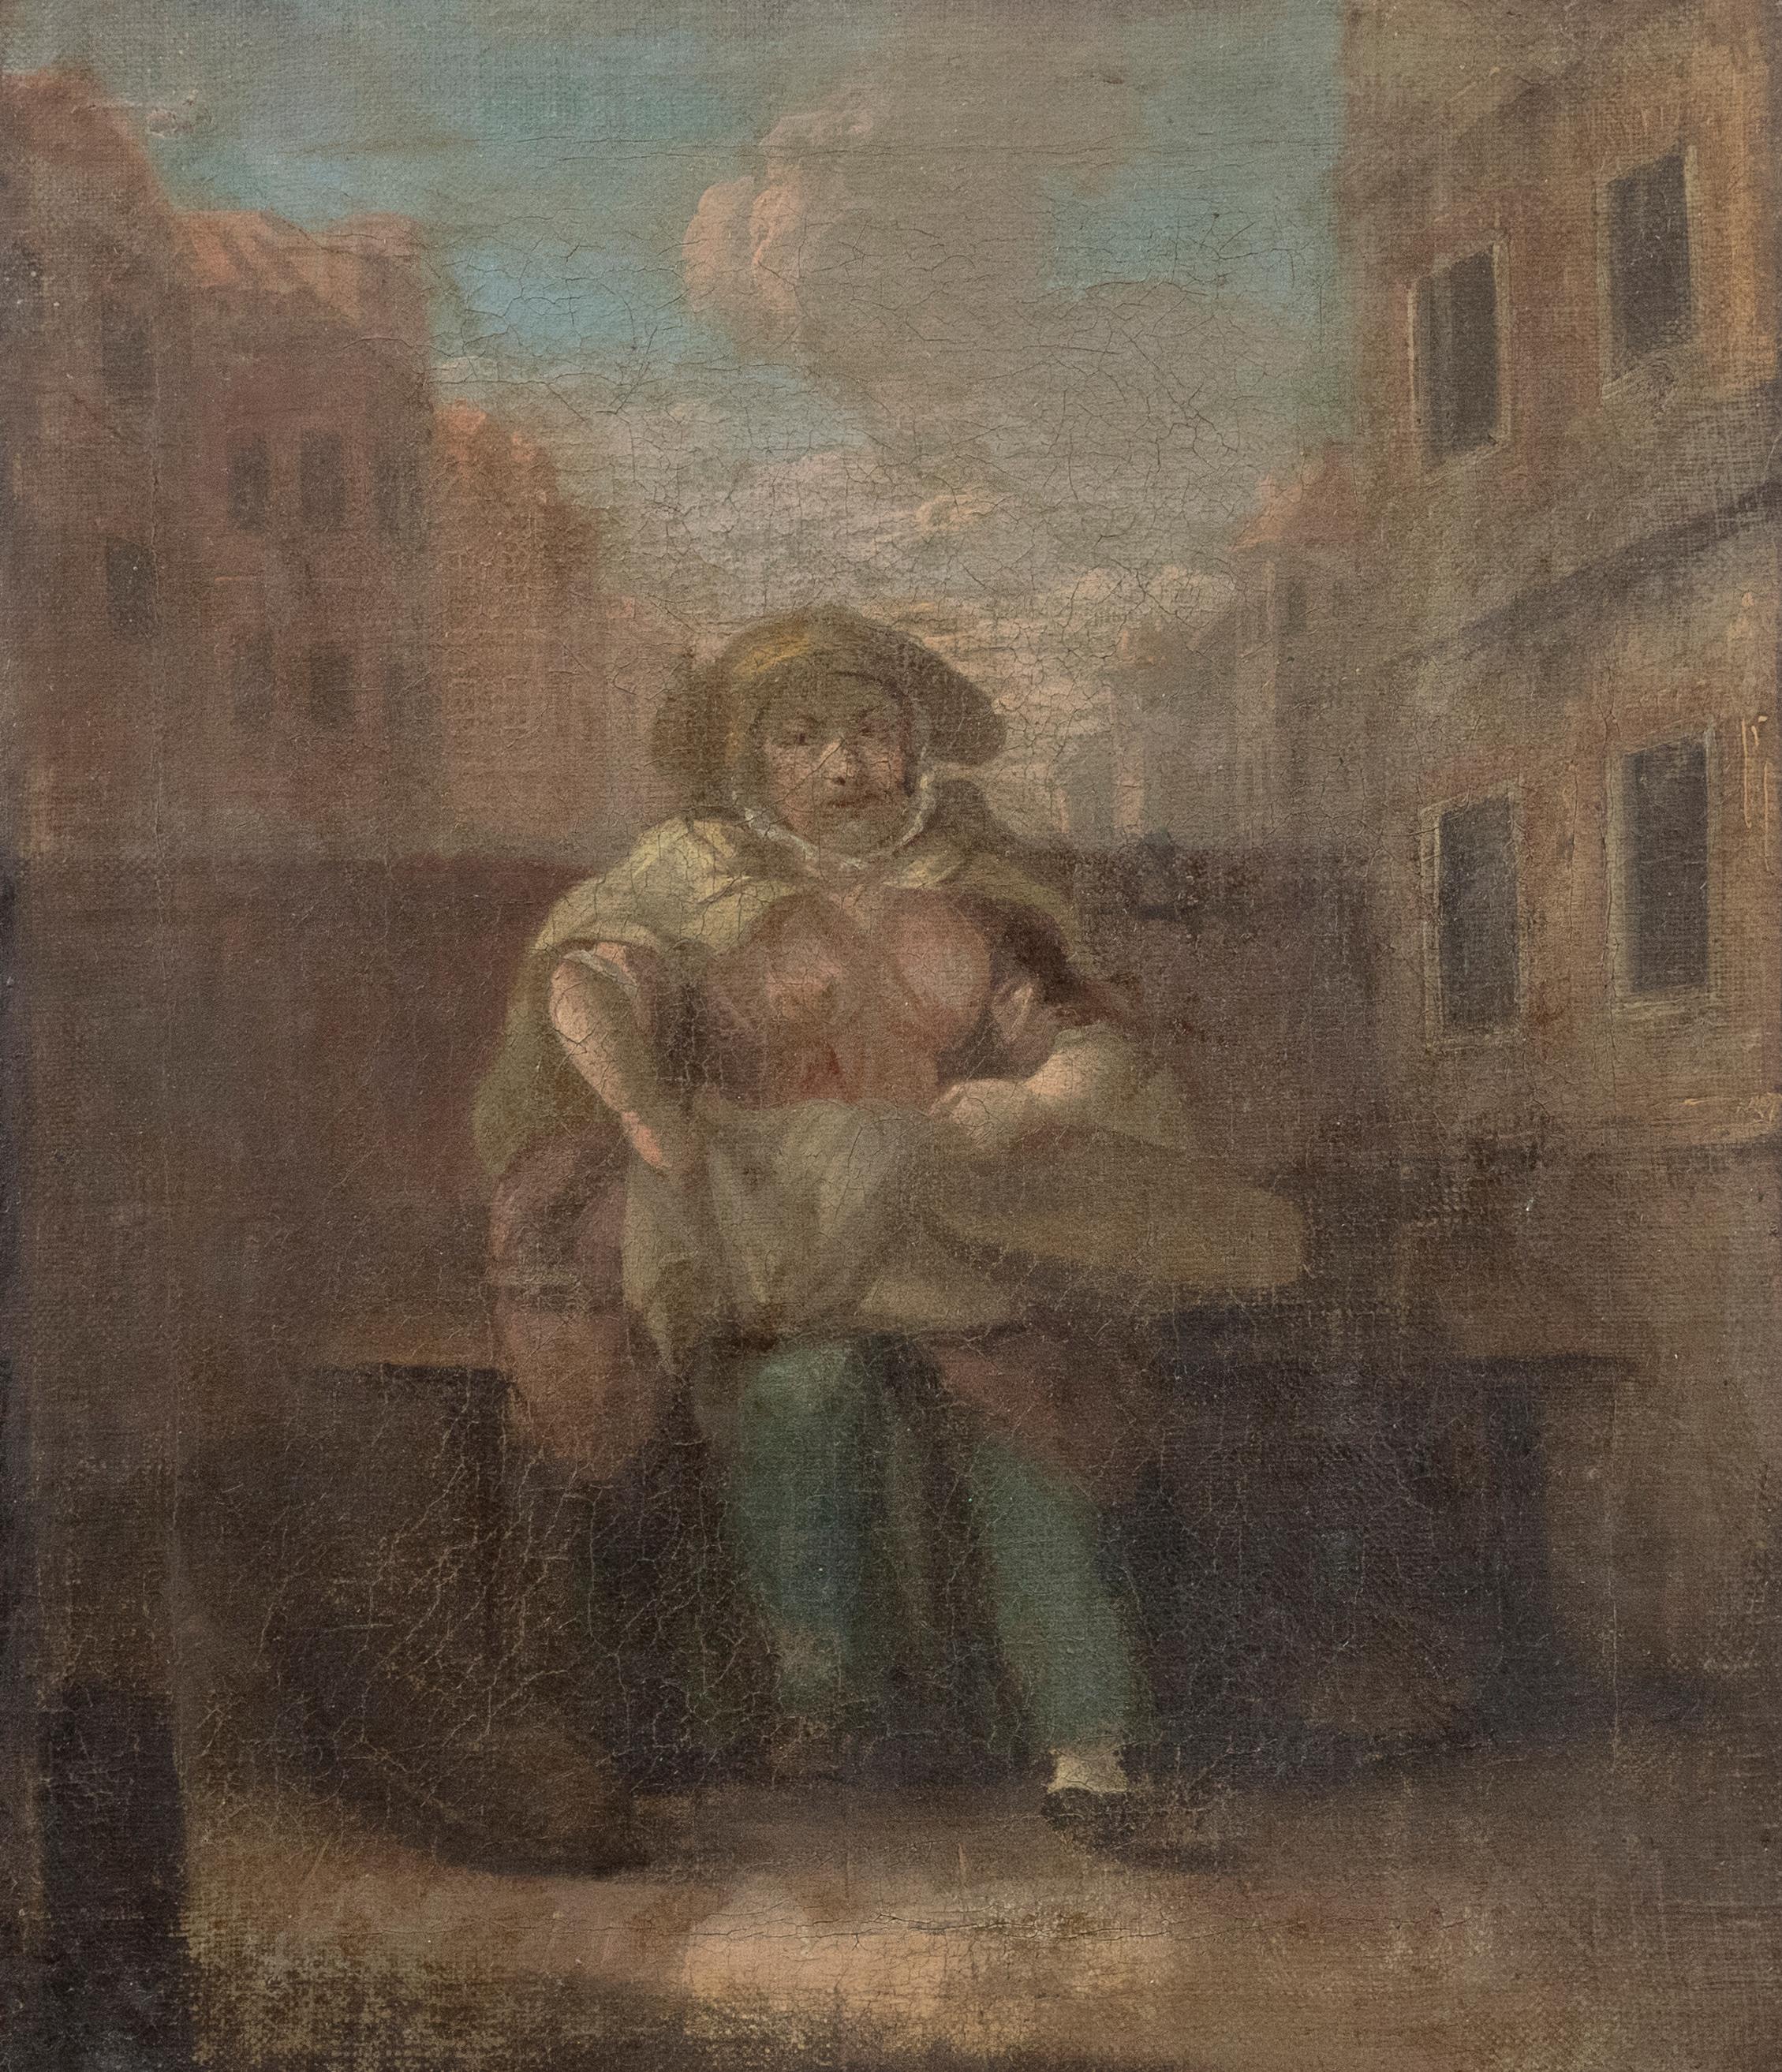 Unknown Portrait Painting - Manner of William Hogarth - Late 18th Century Oil, The Basket Seller